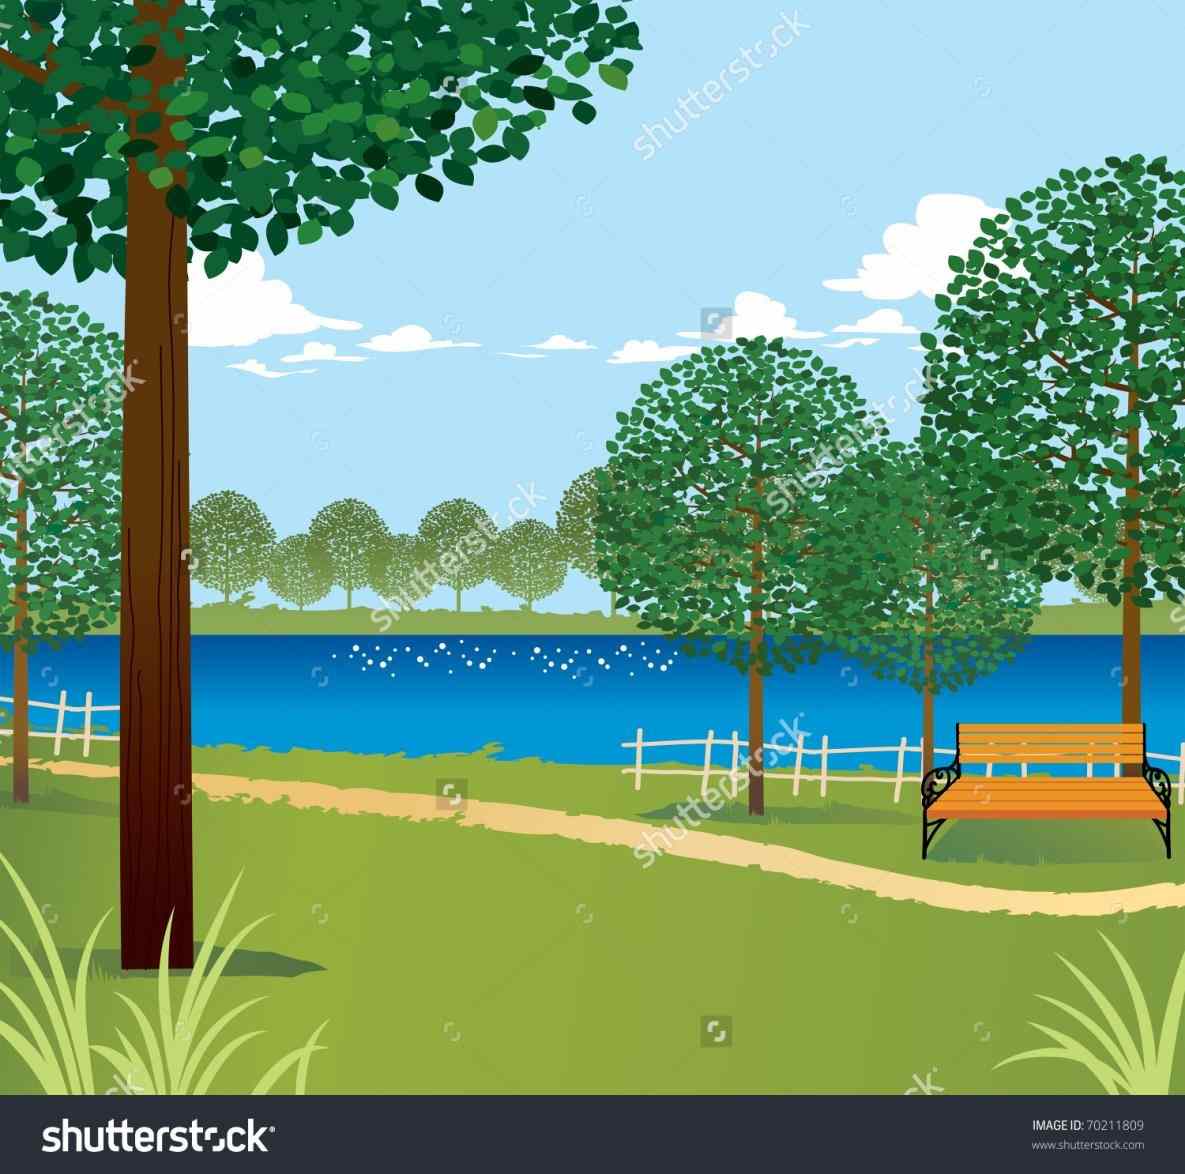 The images collection of. Background clipart park